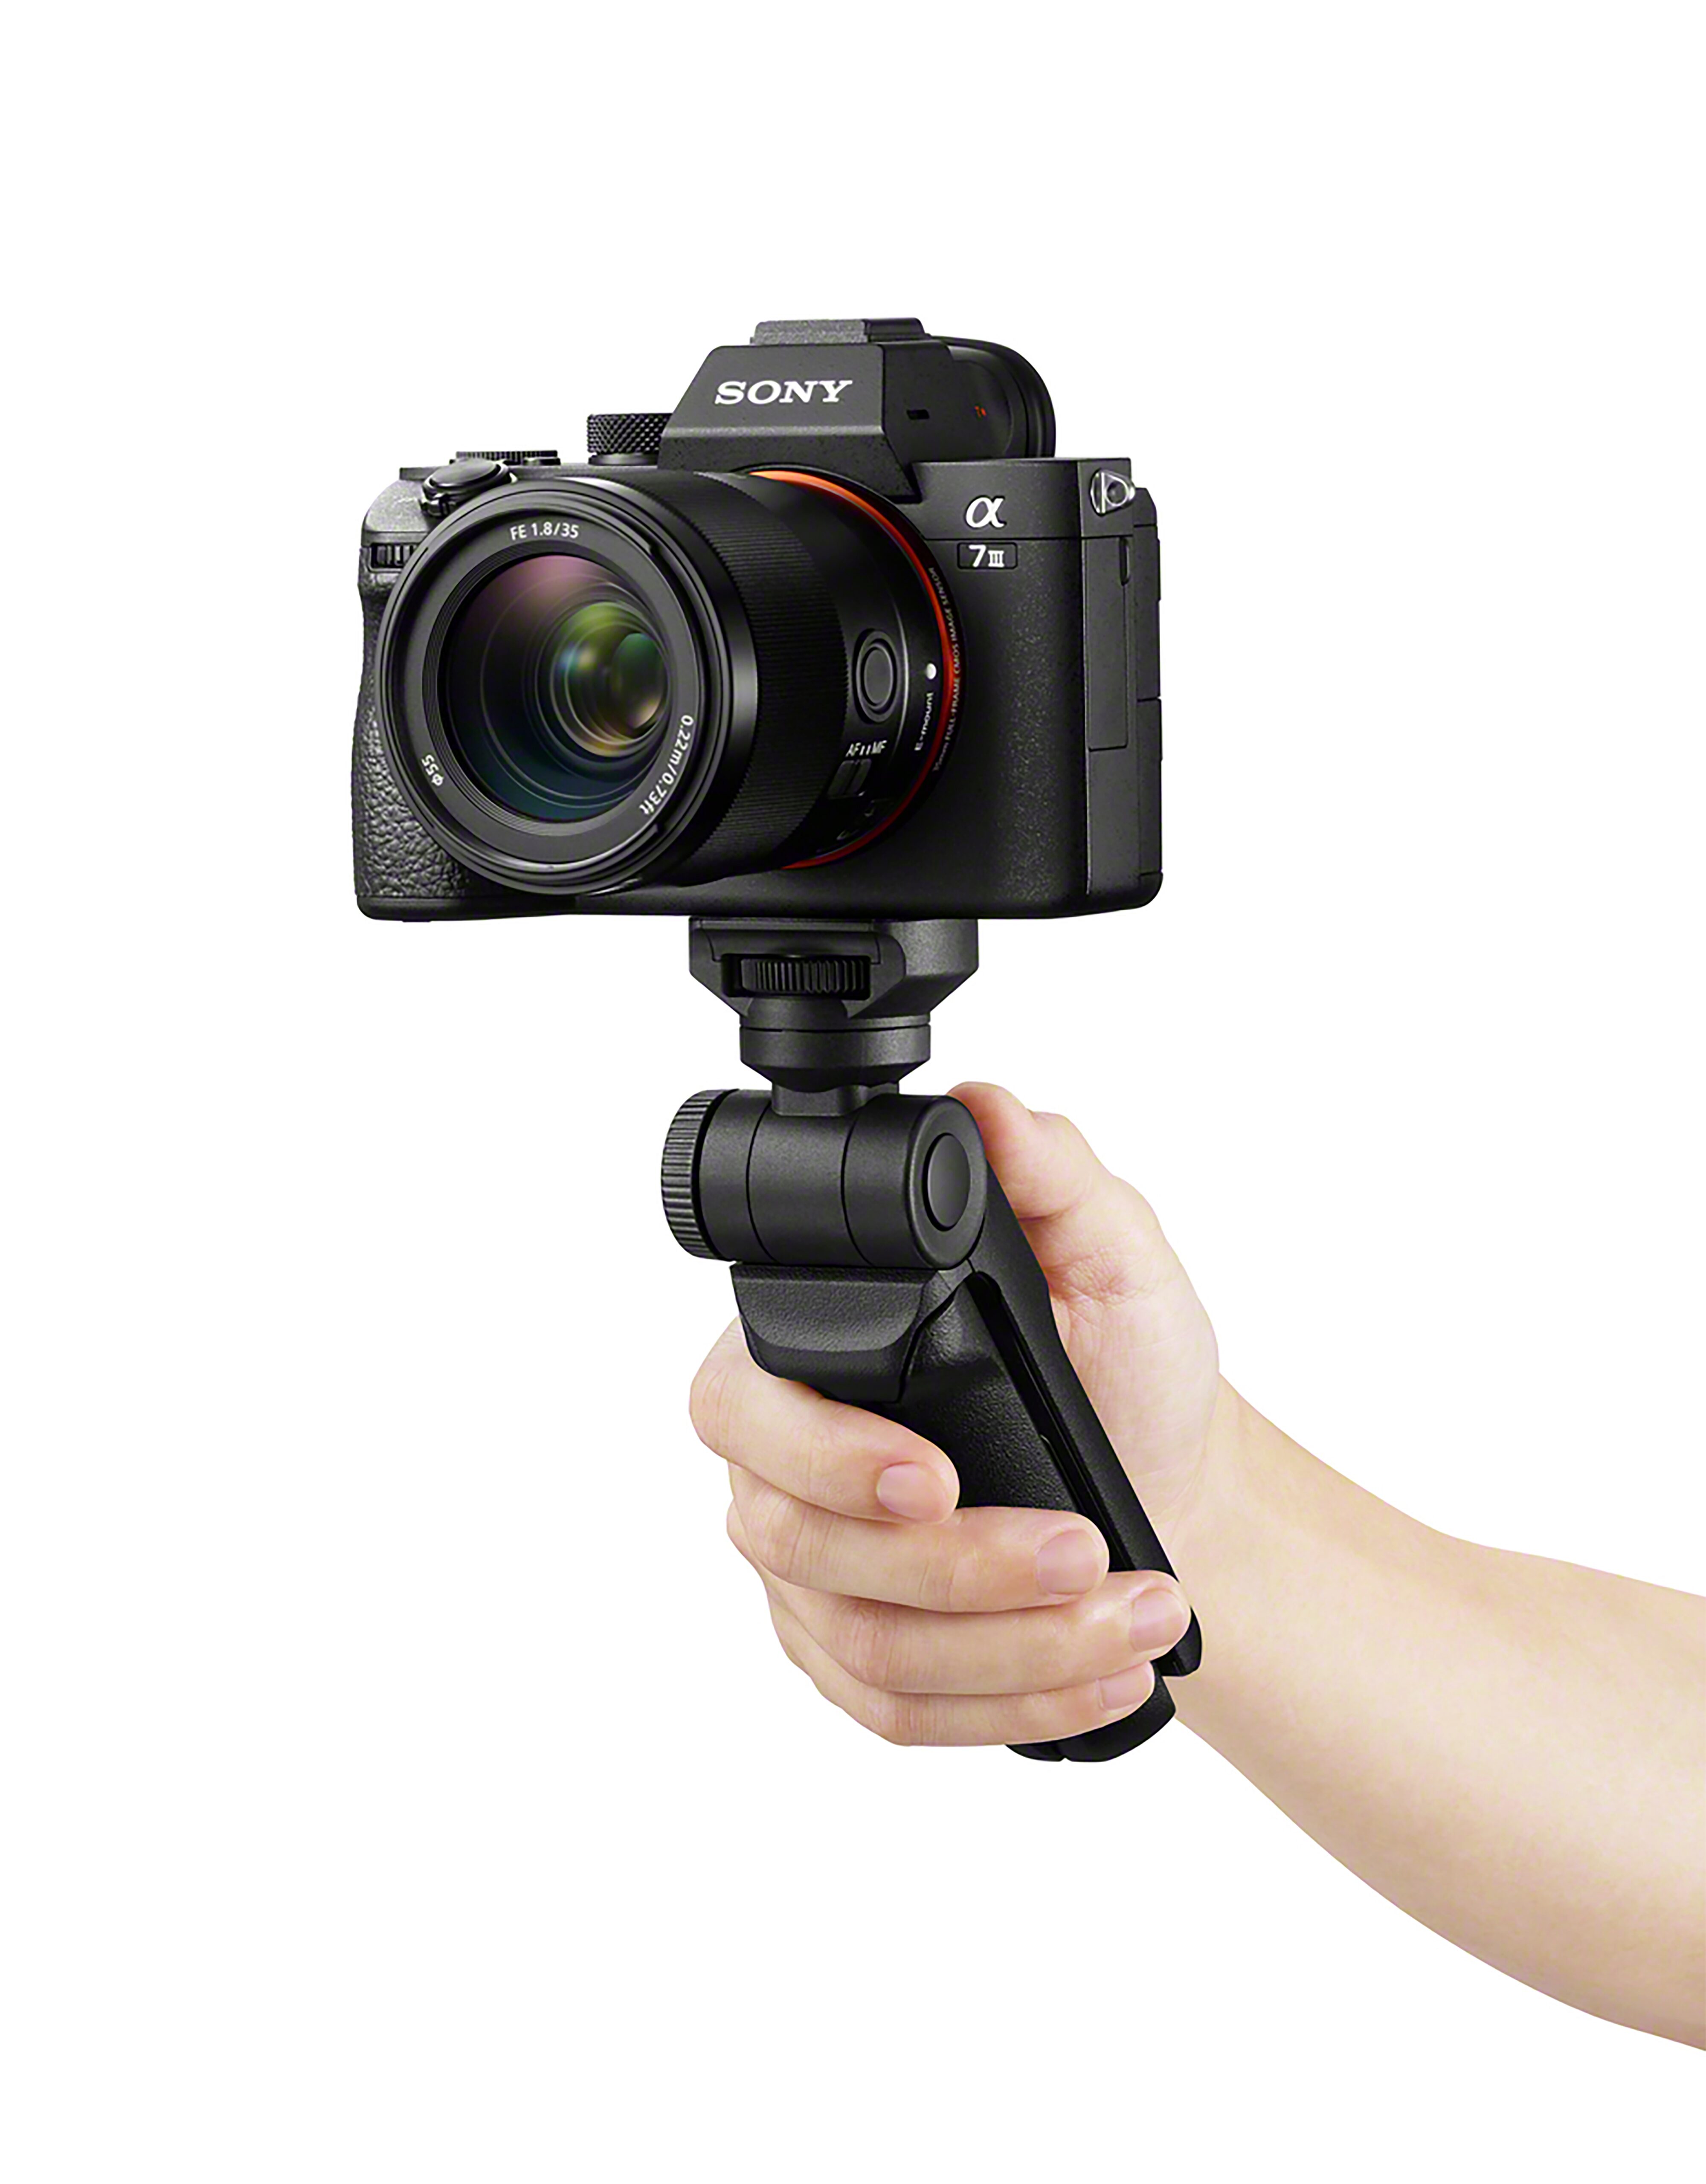 GP-VP2BT - Shooting Grip for Mobility and Creativity | Sony